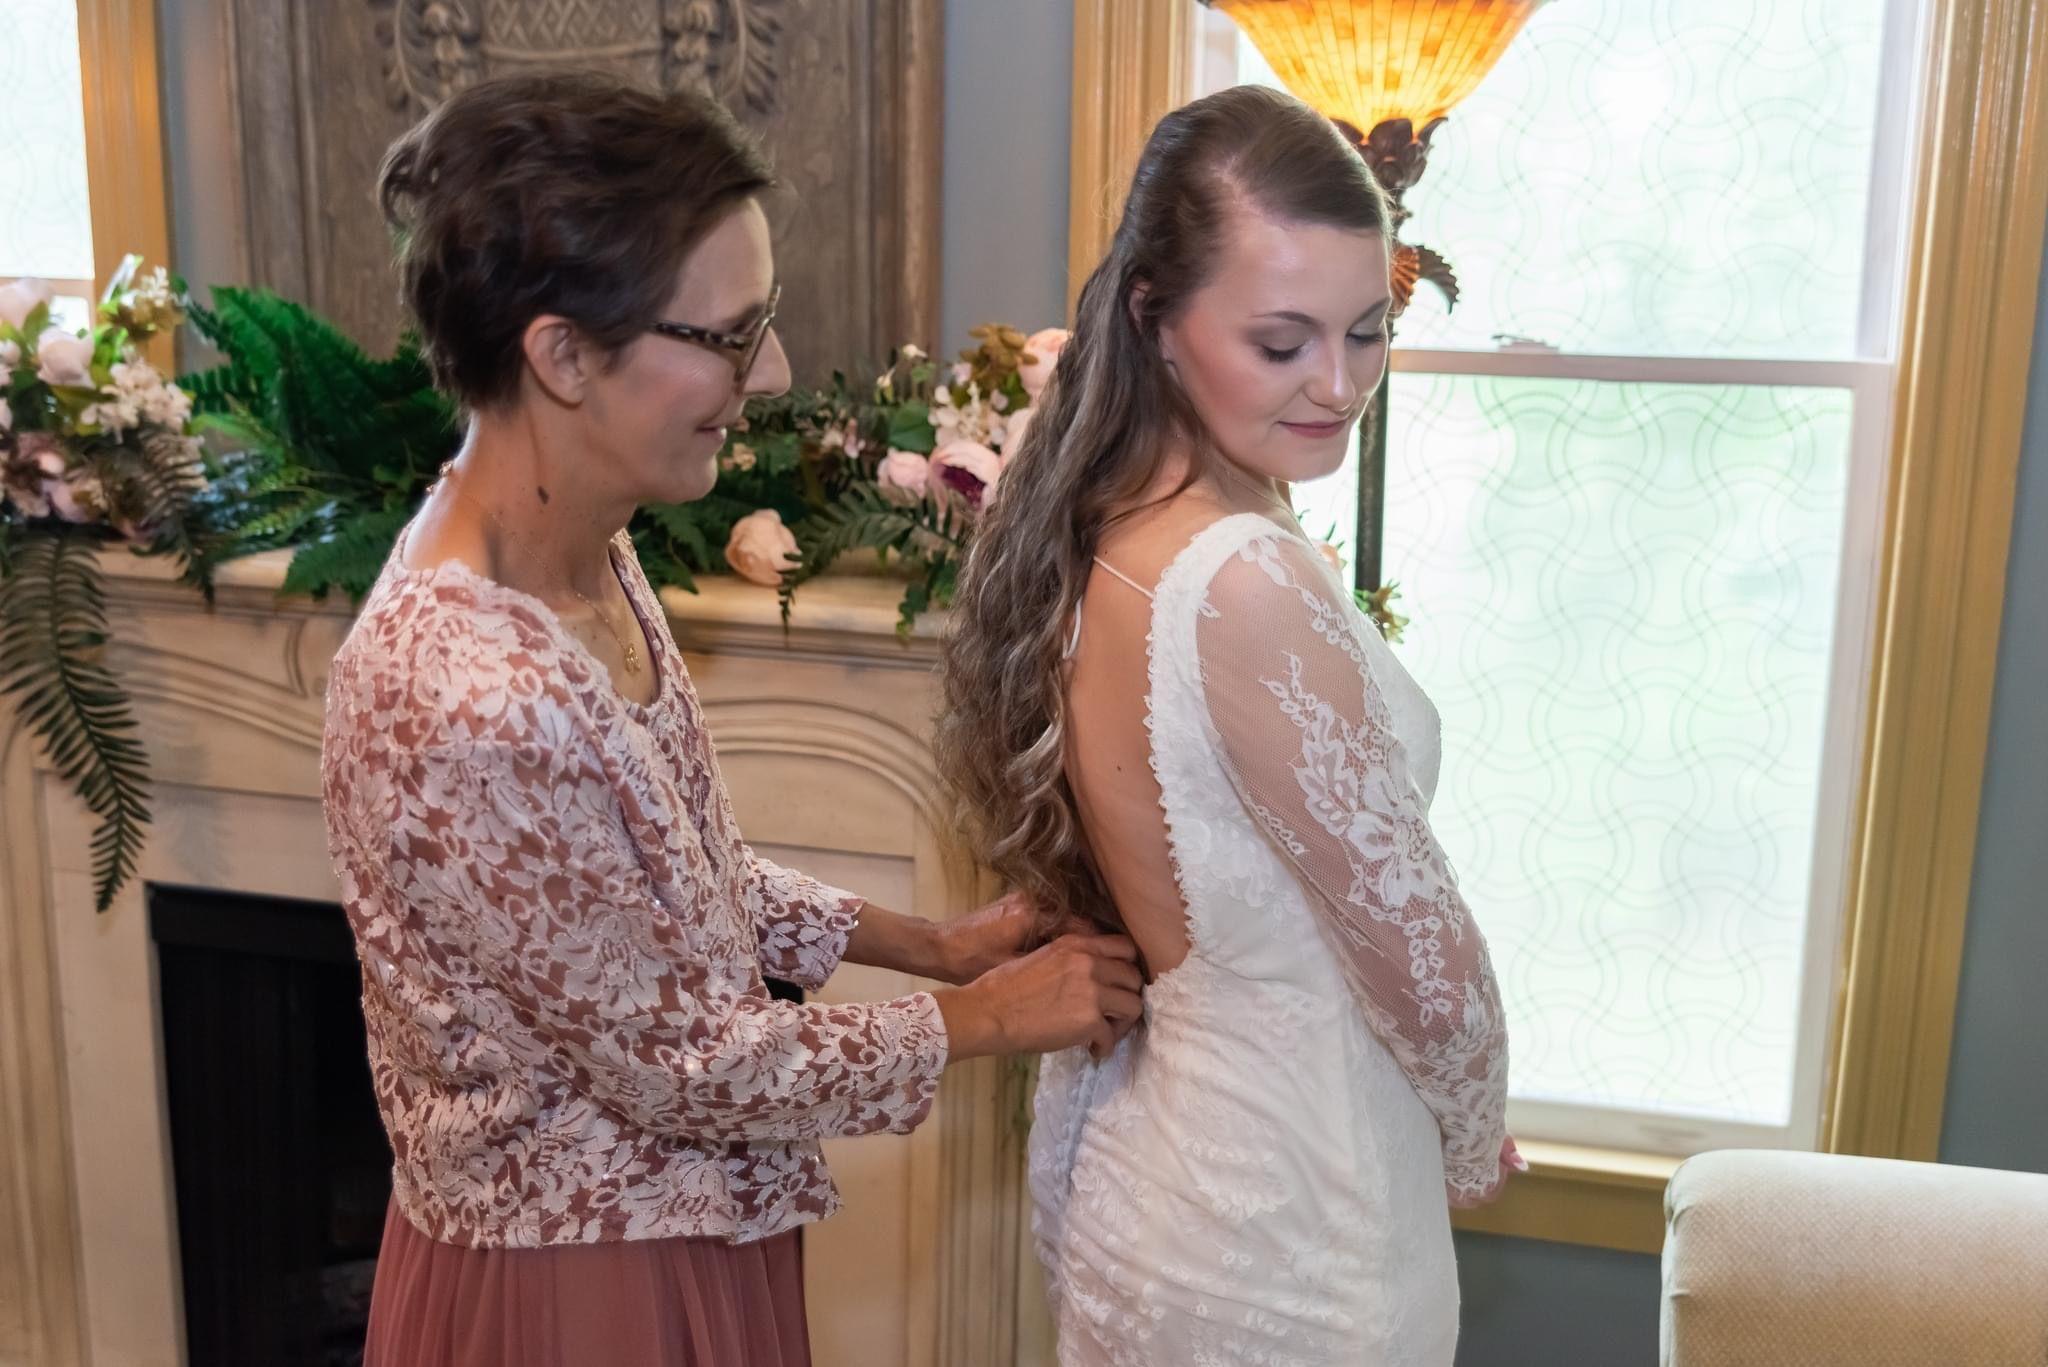 Jodi's wedding dress while backless has the beauty and warmth of lace full length sleeves